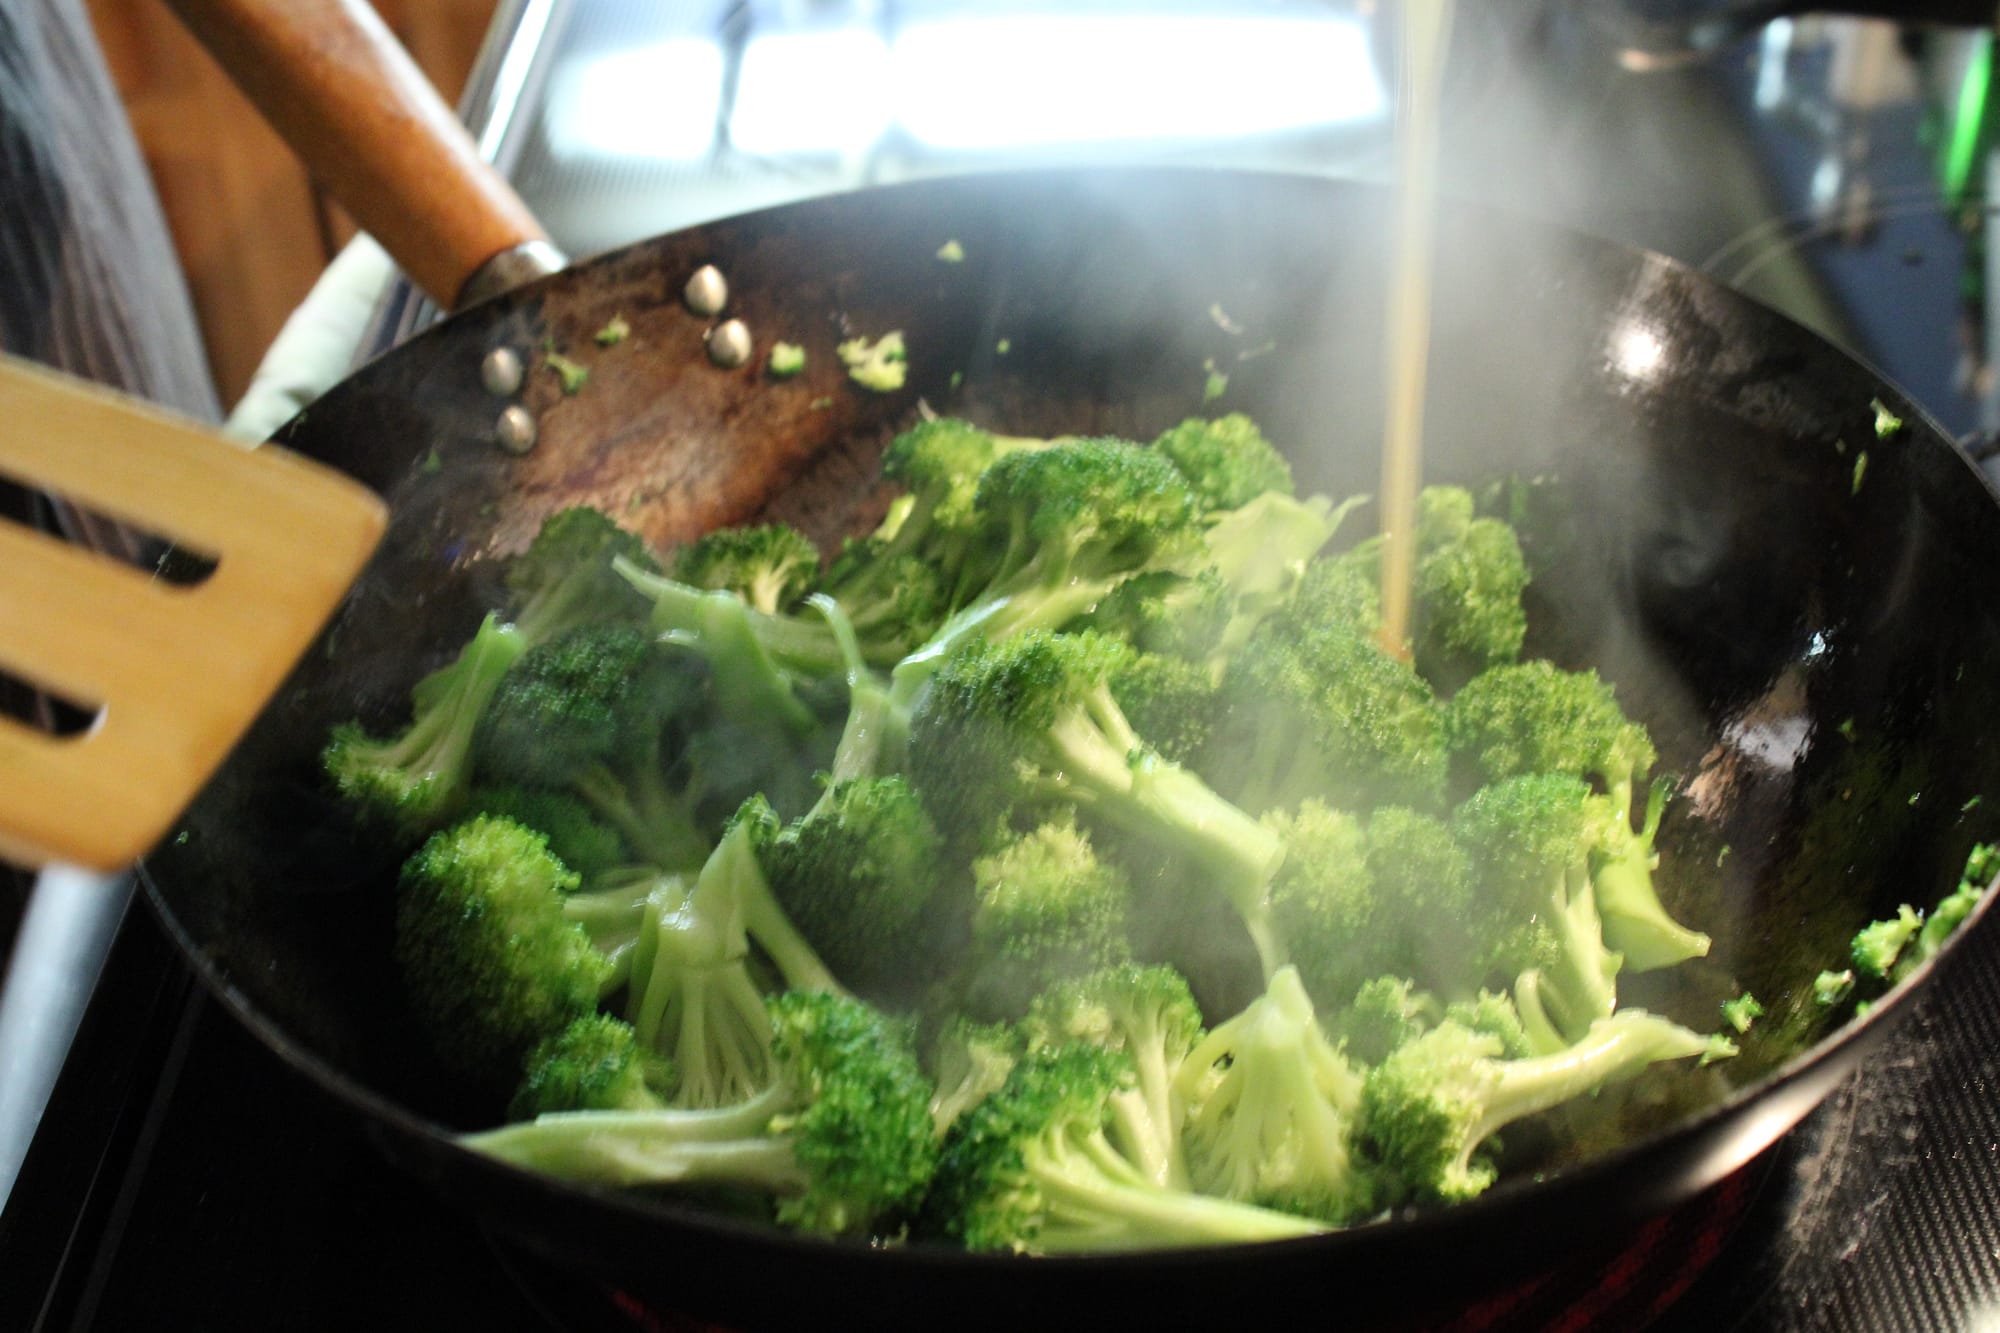 Cooking broccoli in a wok.